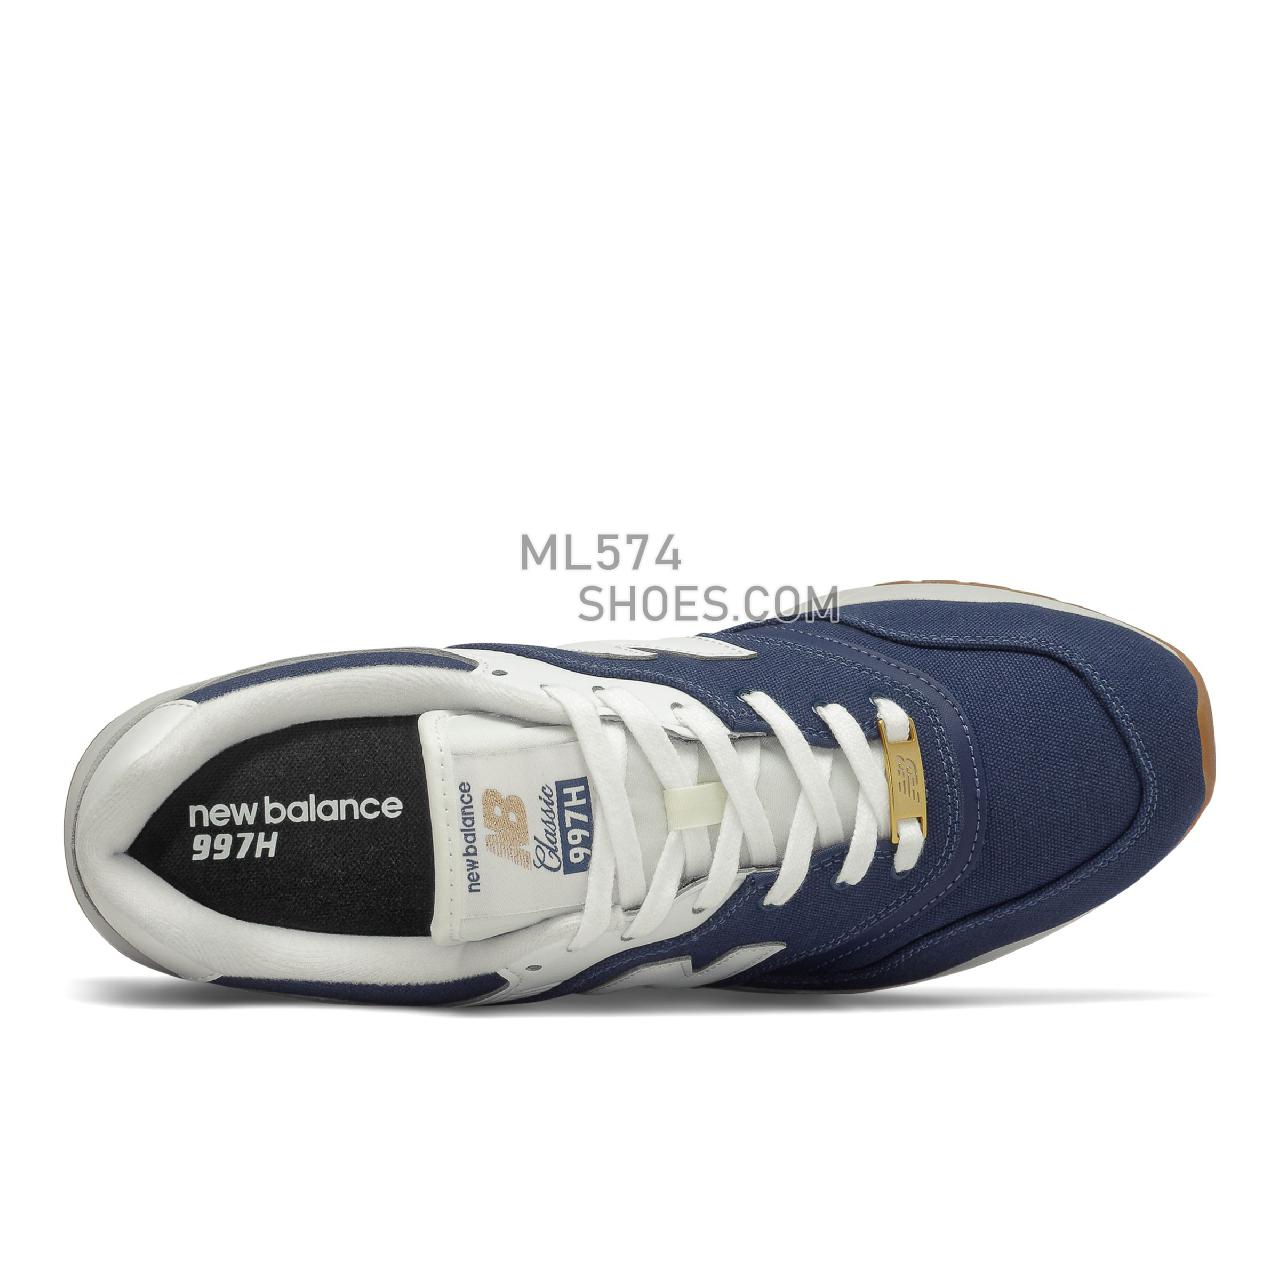 New Balance 997H - Men's Classic Sneakers - Natural Indigo with Gold - CM997HHE